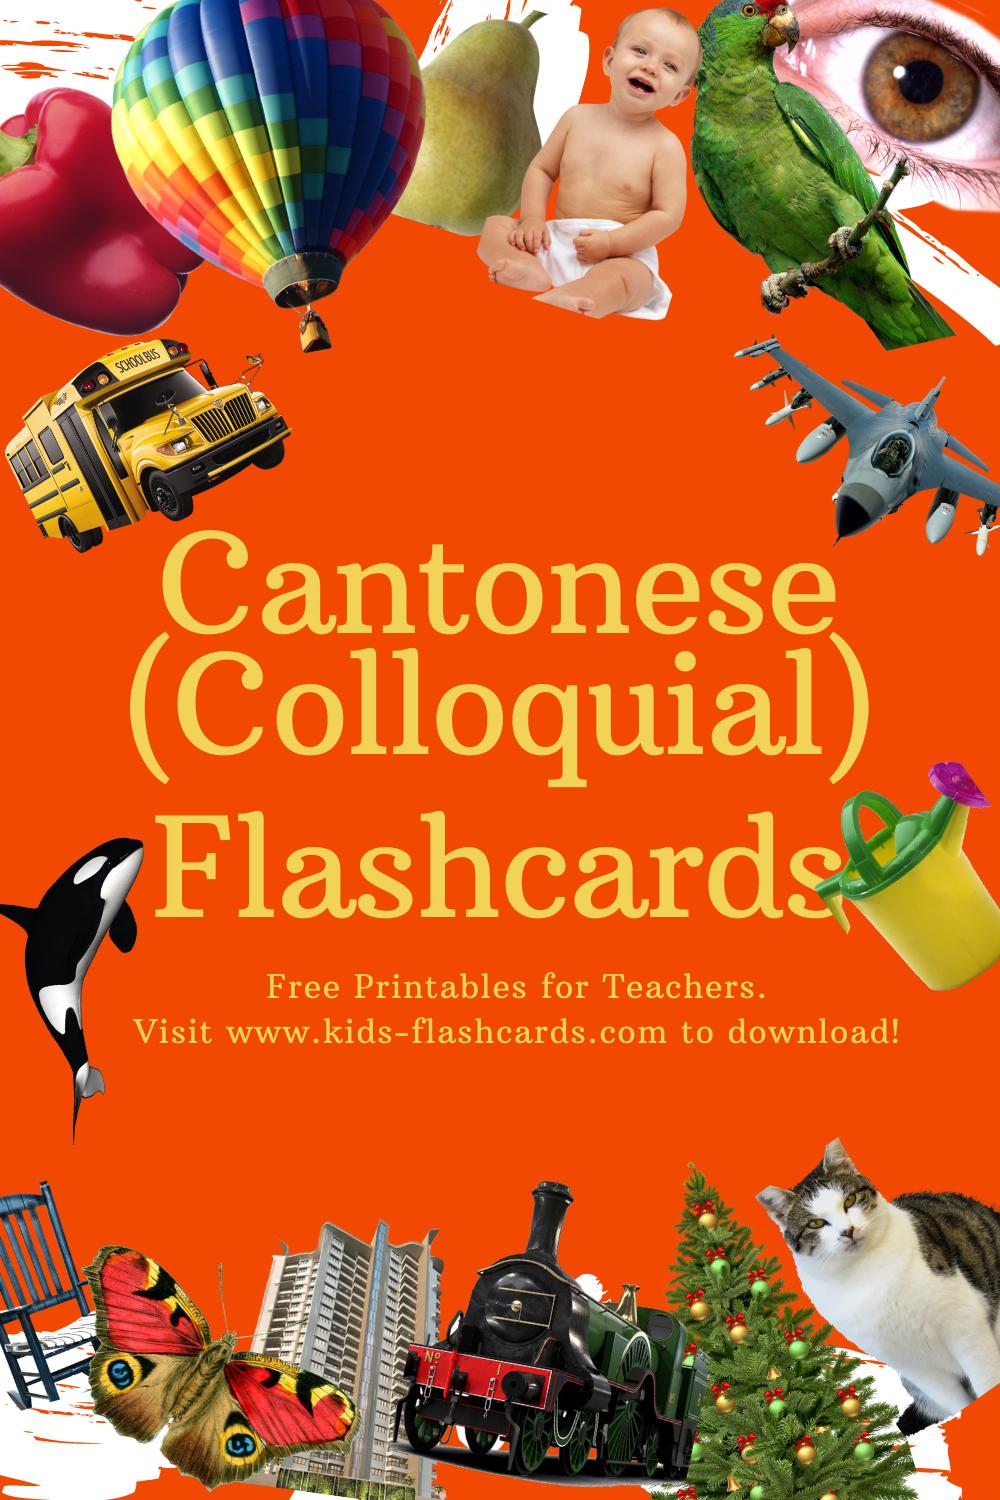 Worksheets to learn Cantonese(Colloquial) language